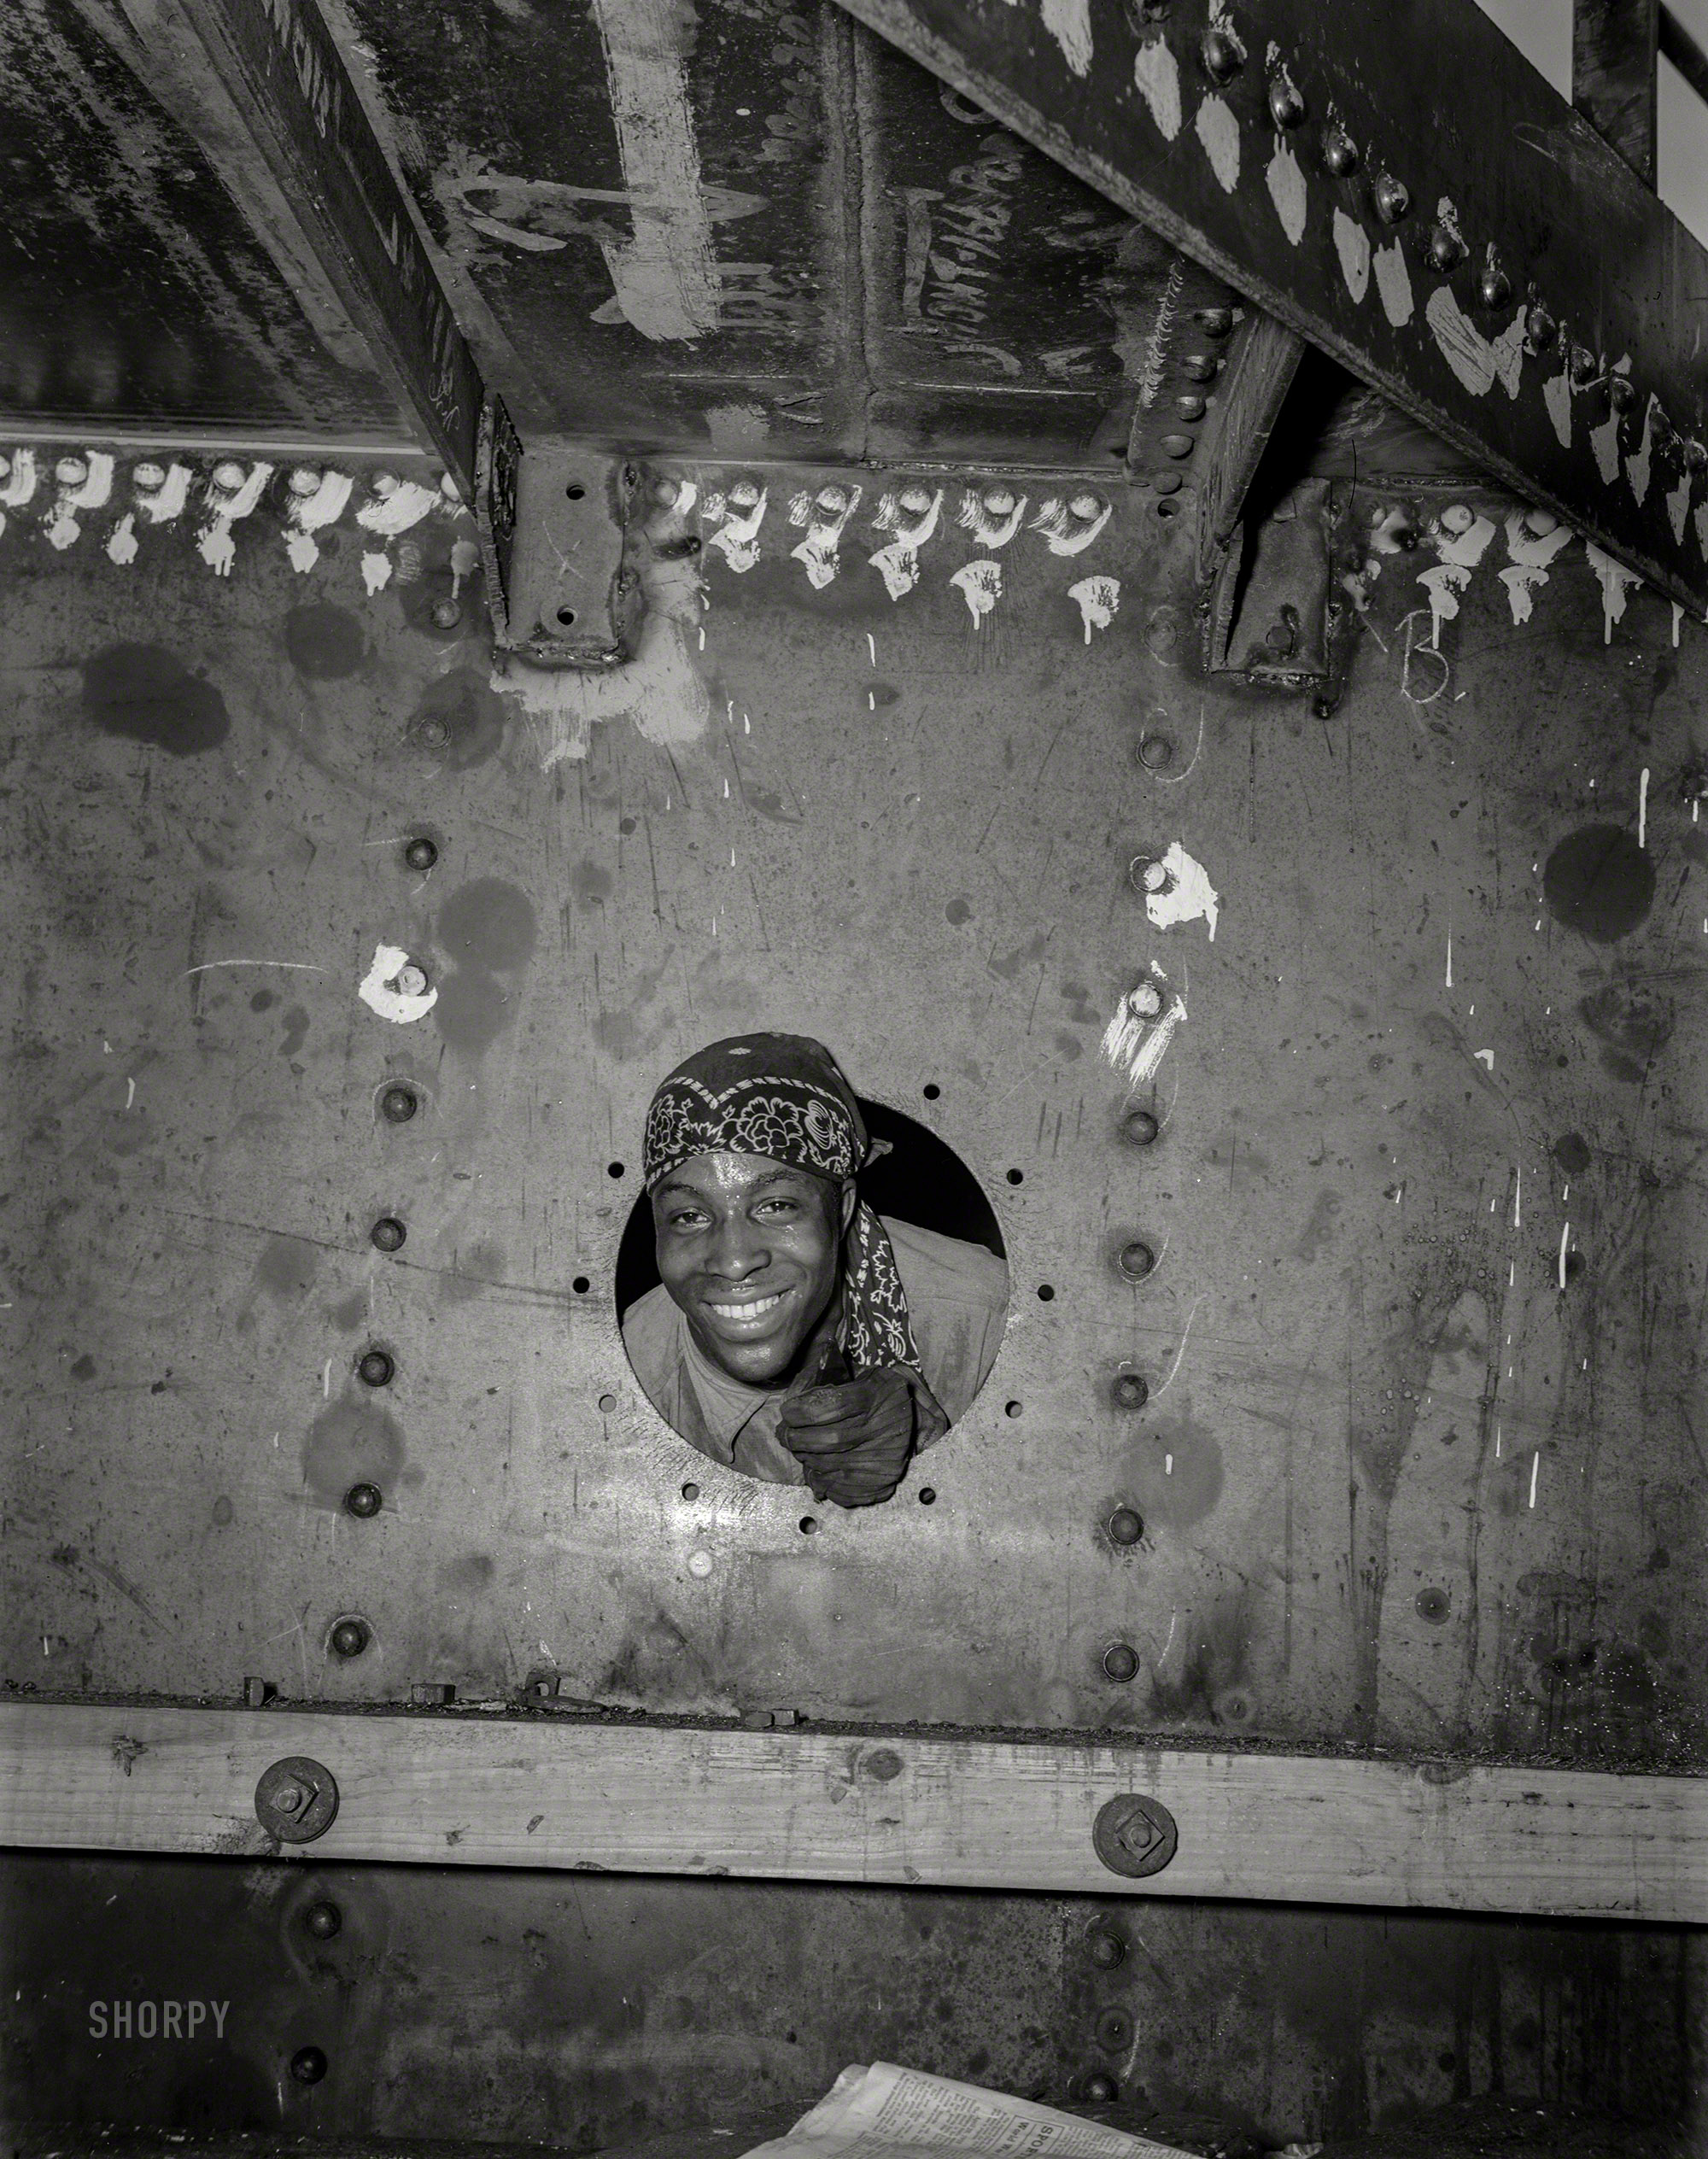 May 1943. "Baltimore, Maryland. Building the SS Frederick Douglass. More than 6,000 Negro shipyard workers are employed at the Bethlehem-Fairfield shipyards, where this Liberty ship is being rushed to completion. Douglass, the noted orator and abolitionist leader, worked as a ship caulker in the vicinity of this yard before he escaped from slavery. Smiling from porthole of the dockhouse is rivet heater Willie Smith." 4x5 inch nitrate negative by Roger Smith for the Office of War Information. View full size.